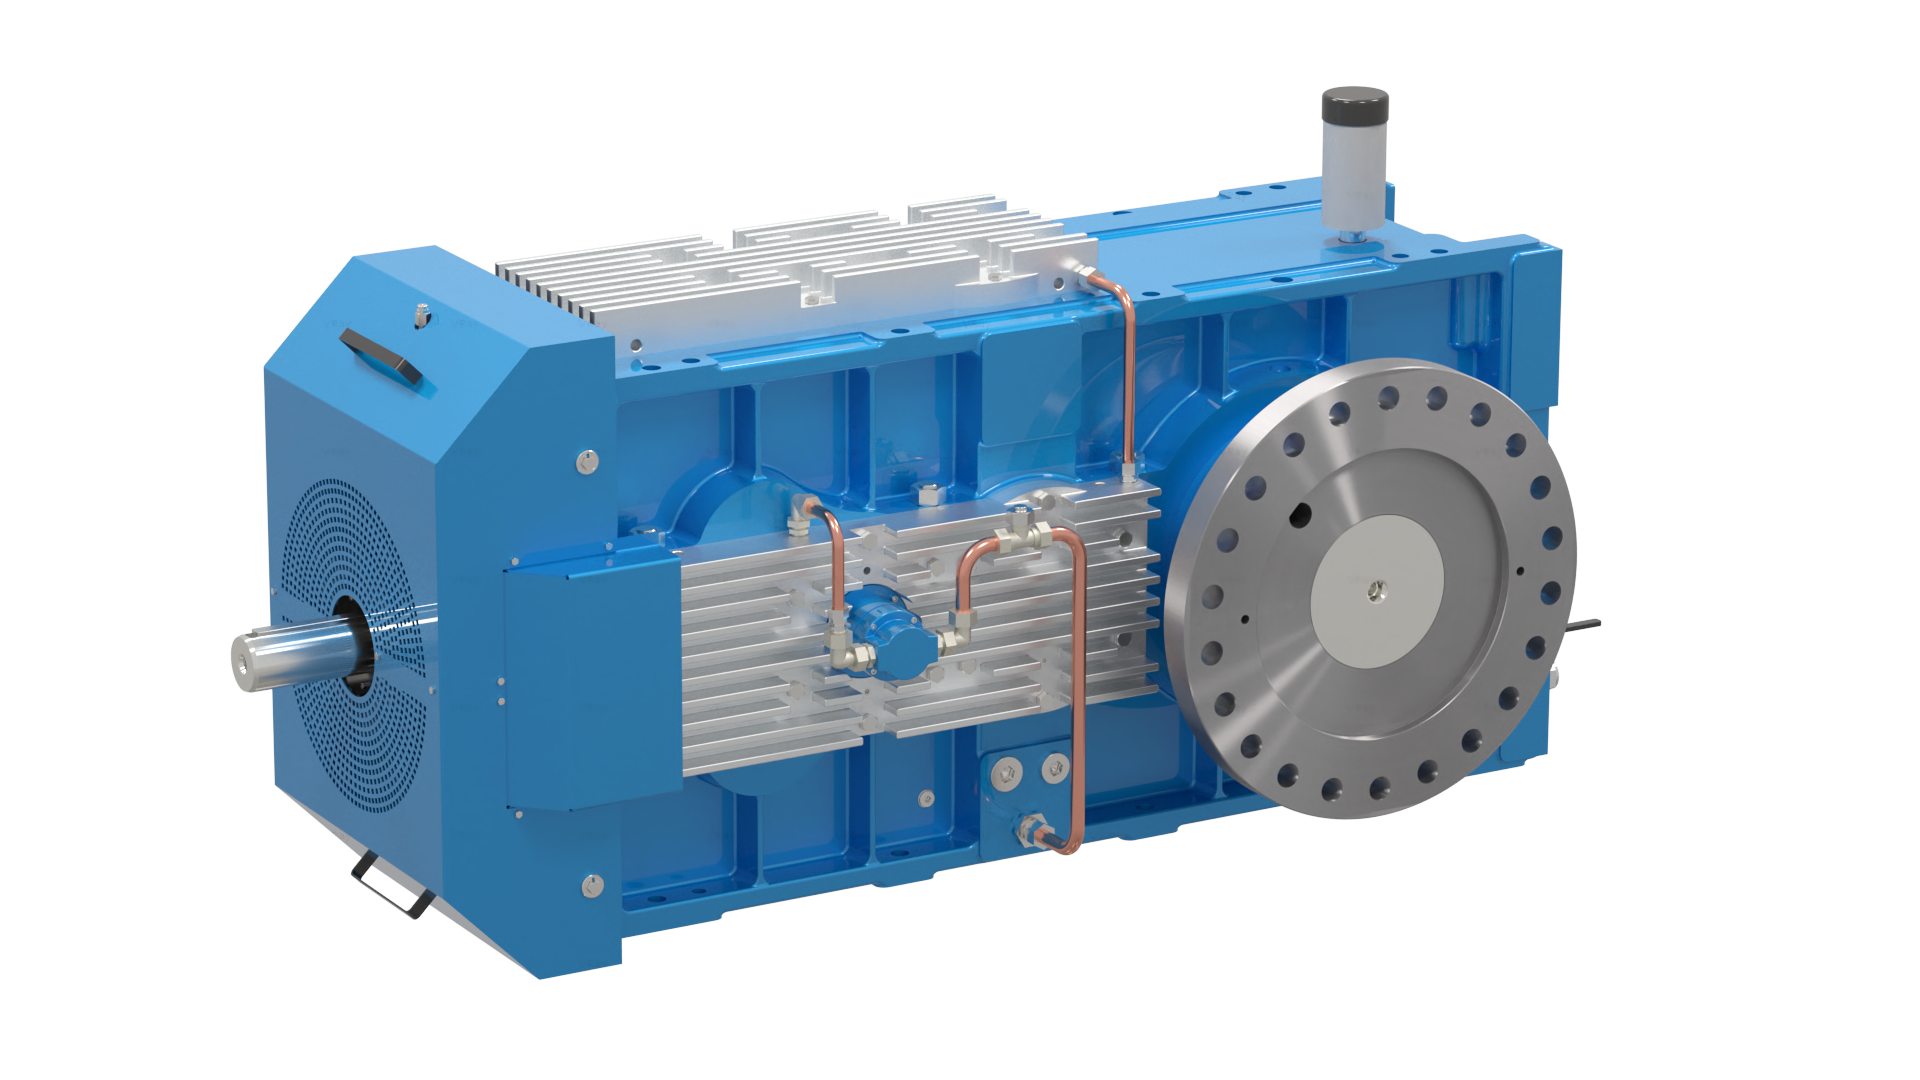 Right Angle Drive Gear Box at best price in Chennai by Sri Pranav  Electrical Engineering